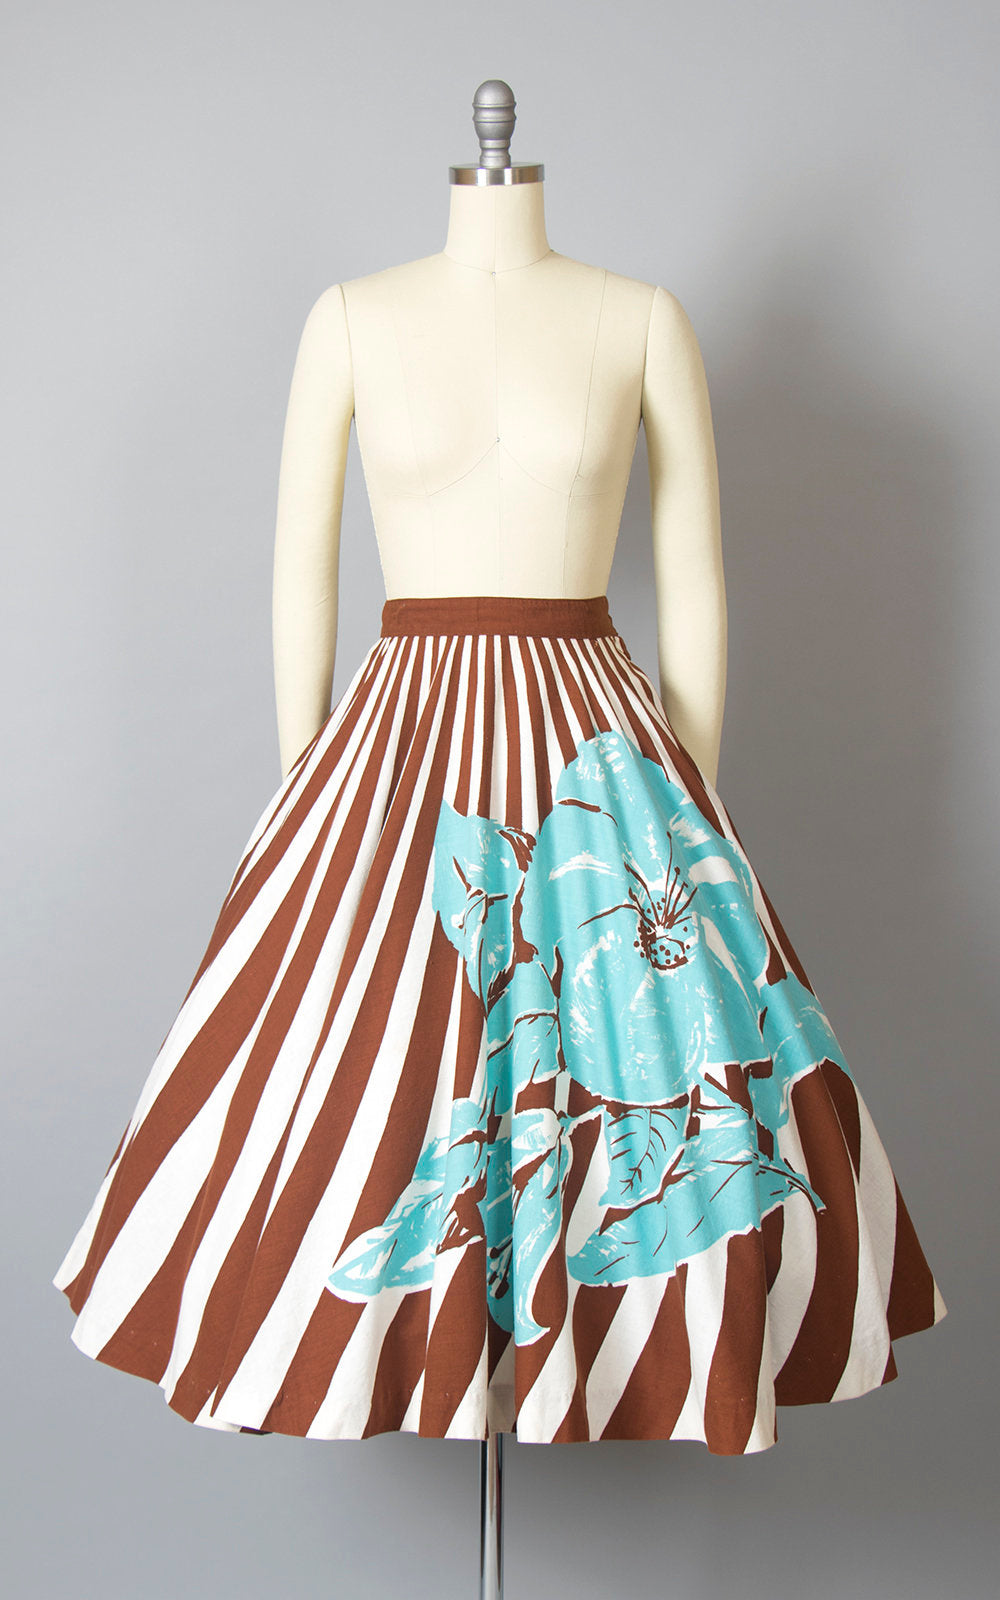 Vintage 1950s Circle Skirt | 50s Oversized Floral Striped Print Cotton Brown Blue Swing Skirt (small)